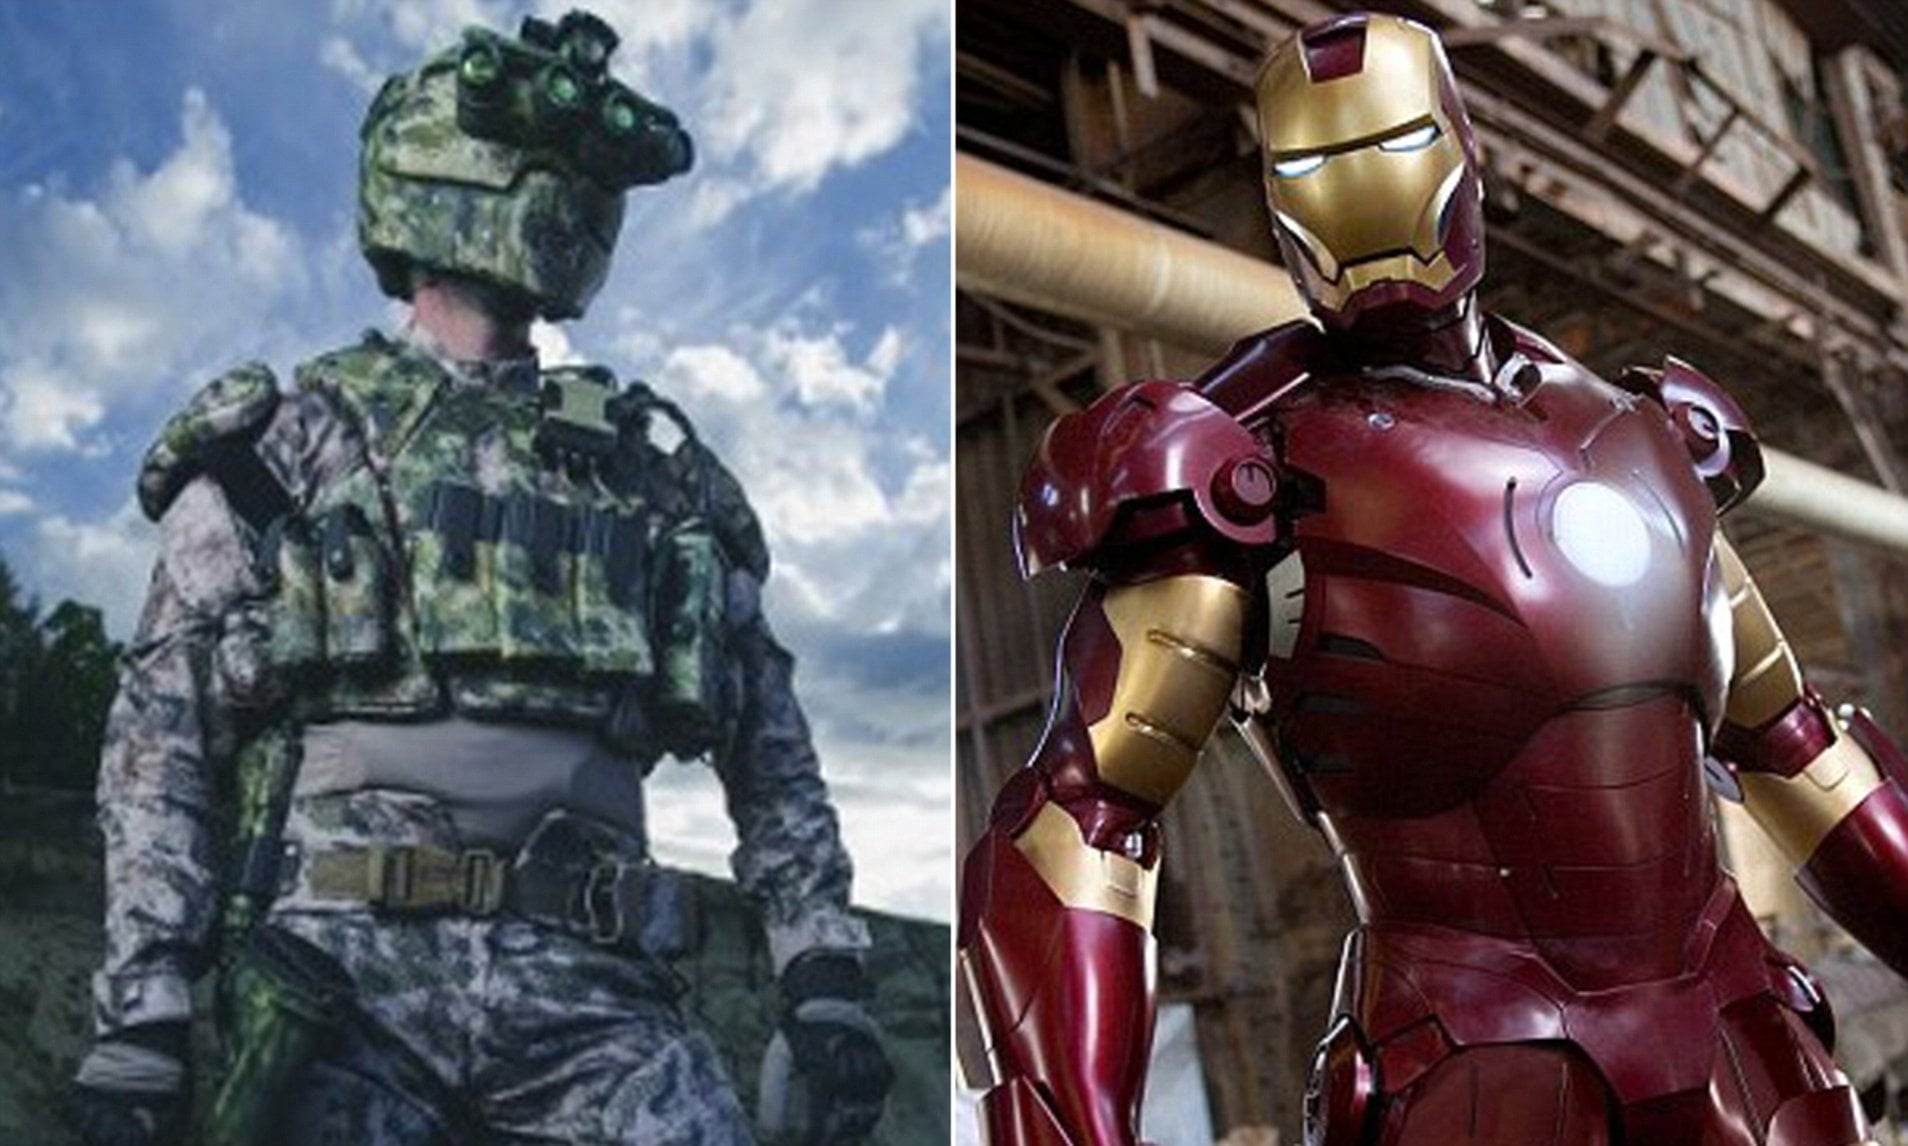 bulletproof or bullet vulnerable testing the durability of us military uniforms